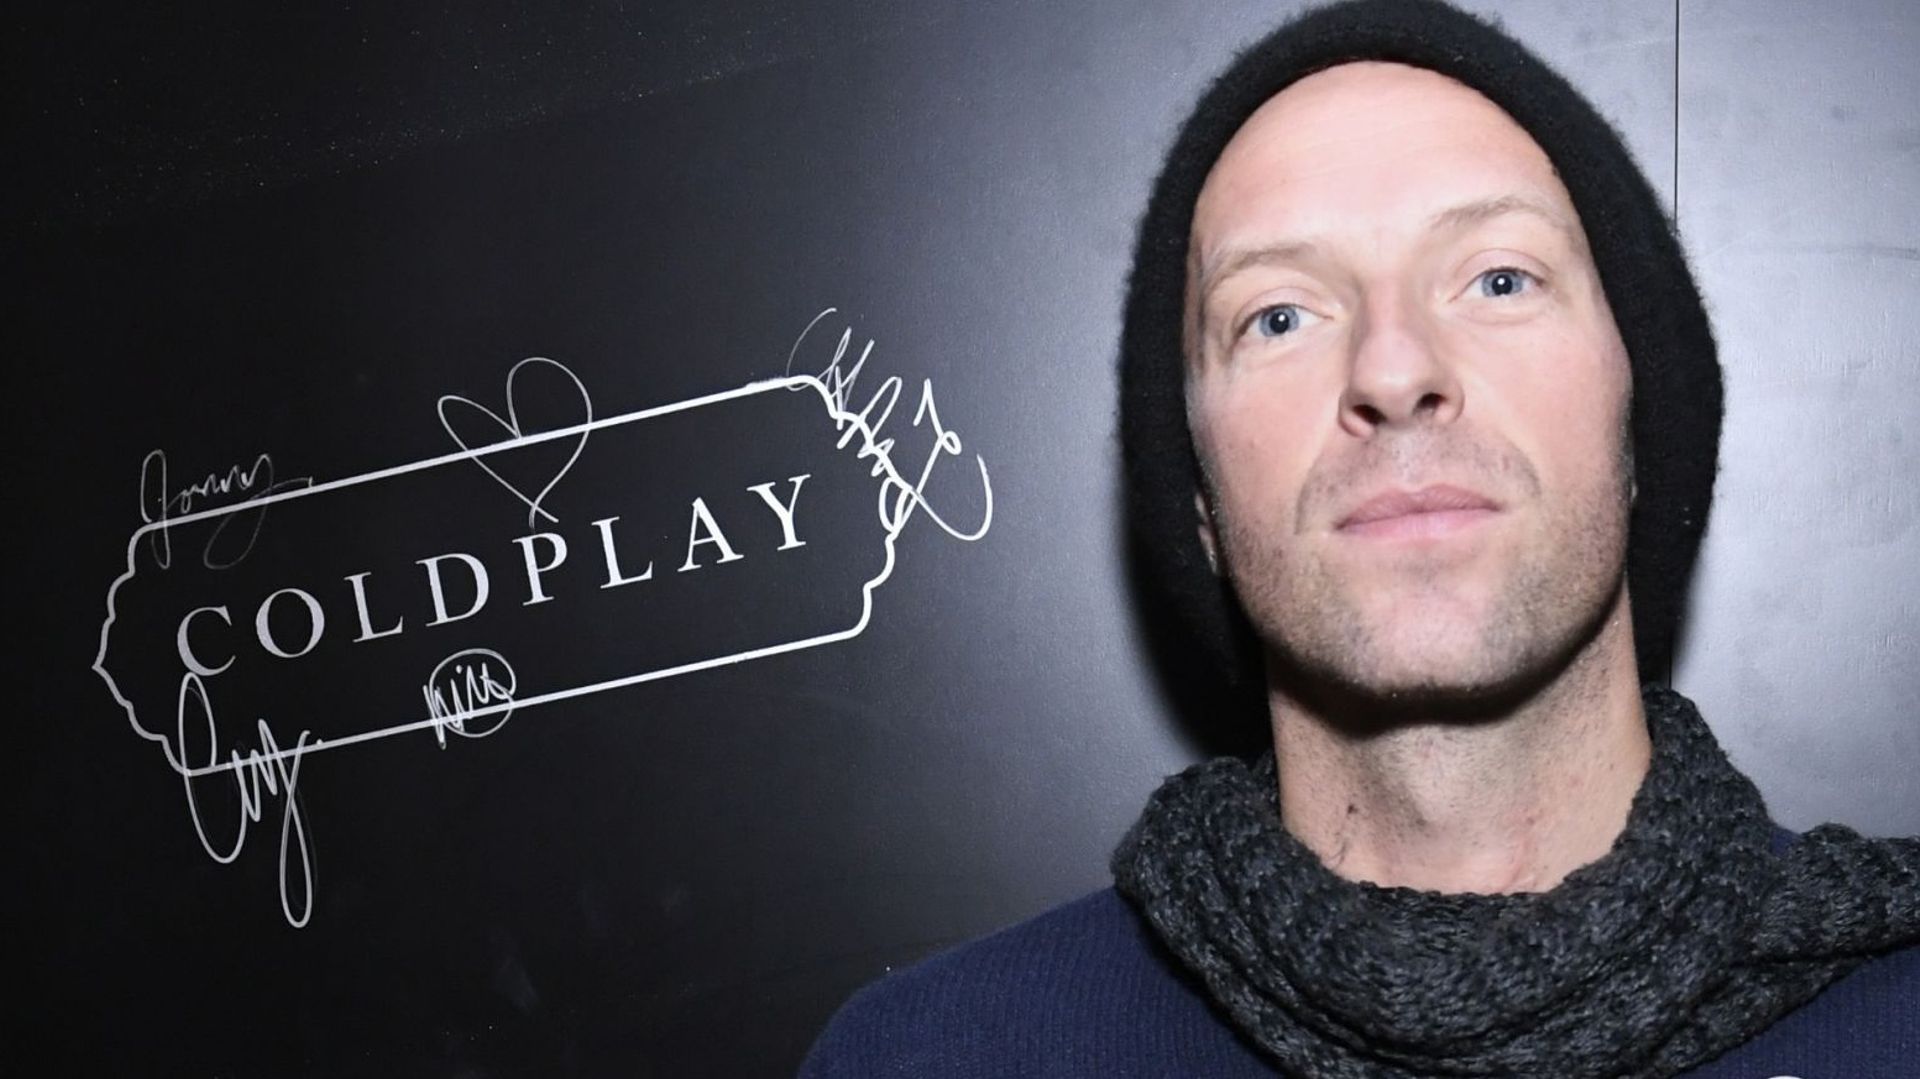 Coldplay Performs at Inaugural RADIO.COM Live Event Series During Grand Opening Of HD Radio Sound Space In Los Angeles On January 17, 2020